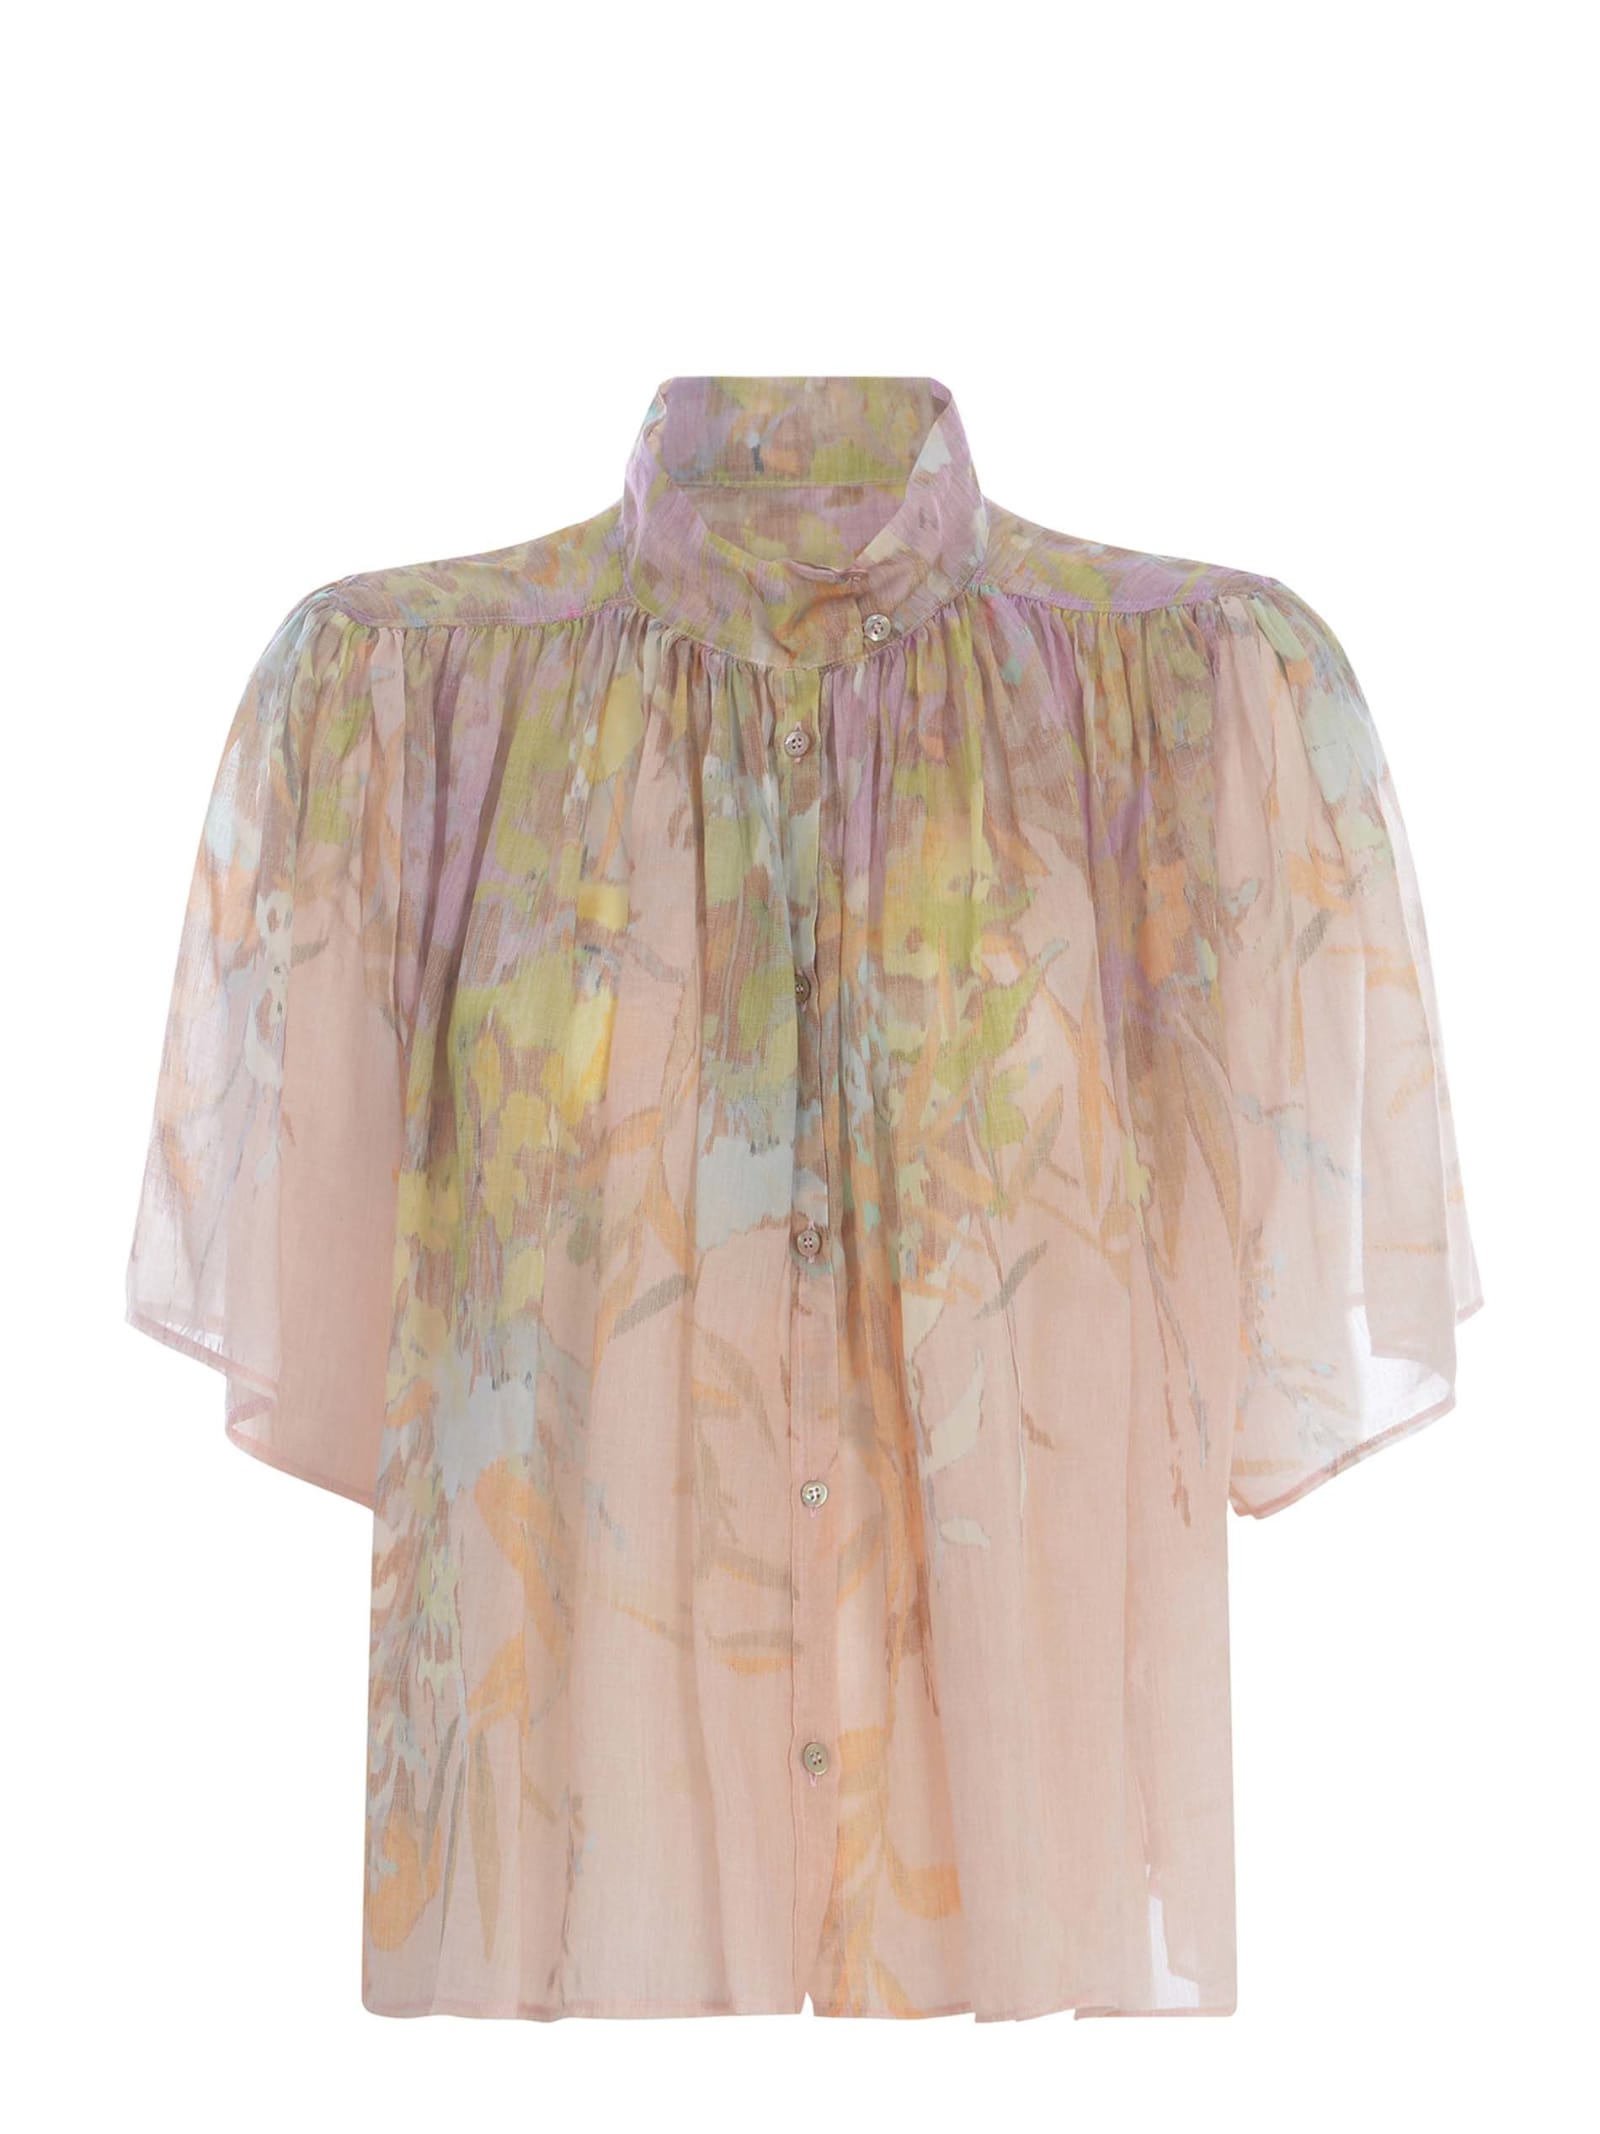 FORTE FORTE SHIRT FORTE_FORTE MADE OF COTTON AND SILK MUSLIN